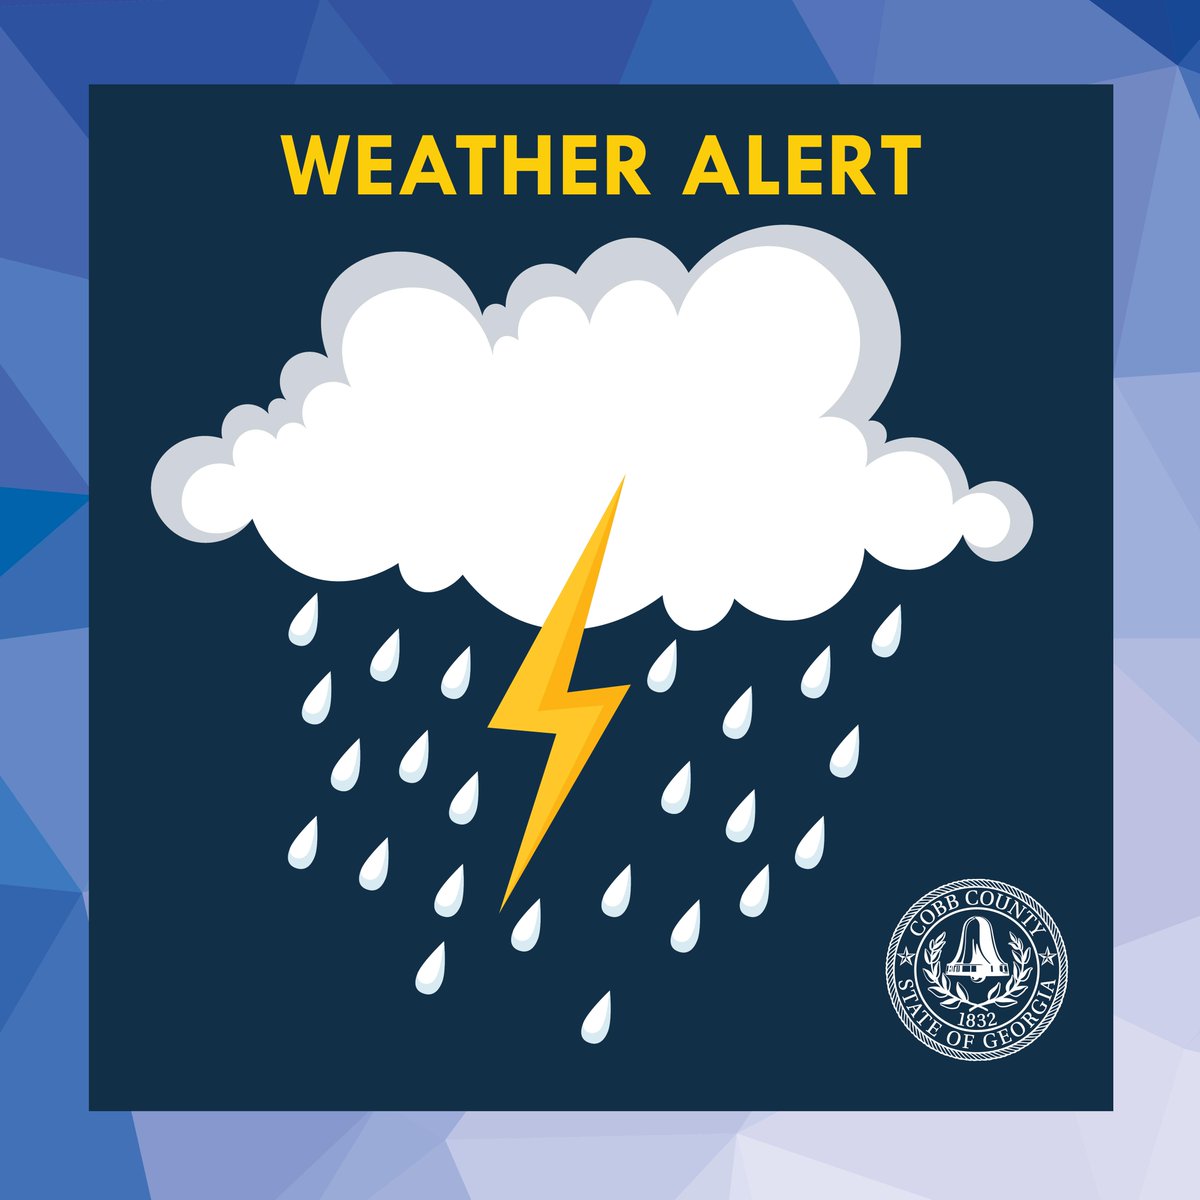 Tonight there is the possibility of severe weather through 8 a.m. Thursday, May 9 for the Cobb County area. There is potential for scattered storms with 1-3” of rain, large hail, damaging winds (up to 60 mph) and tornado risk. 

#CobbCounty #severeweather #weatheralert